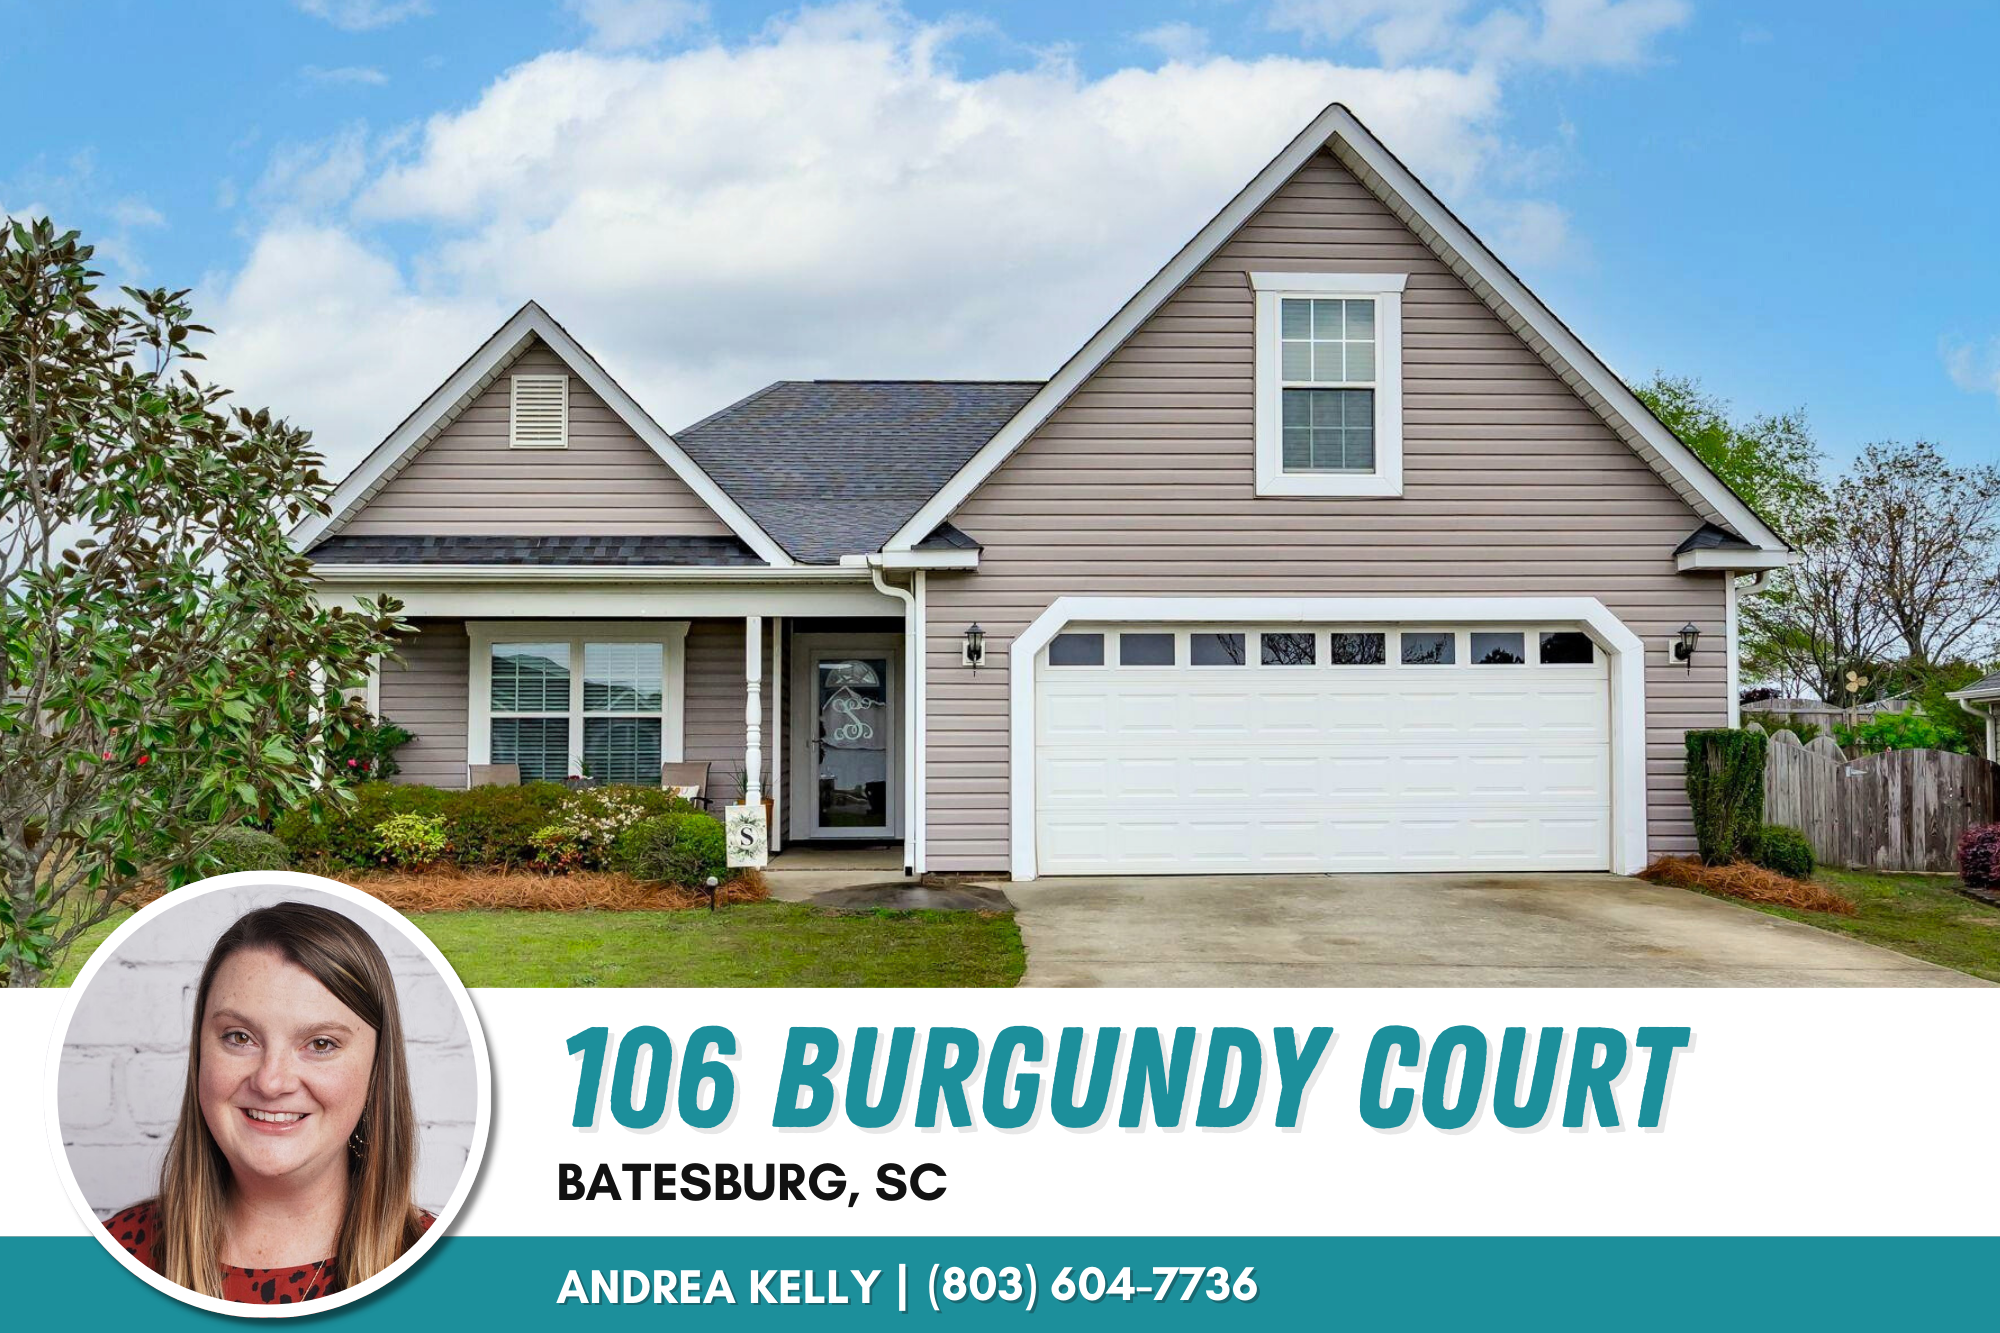 Just listed in The Vineyard - Batesburg